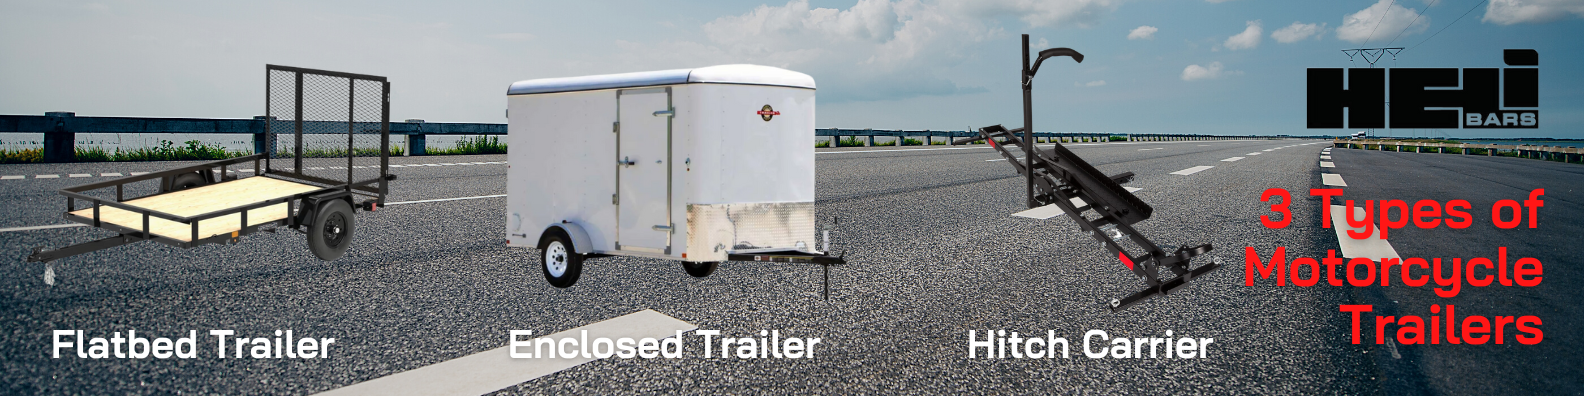 How to Trailer A Motorcycle… Properly! - HeliBars